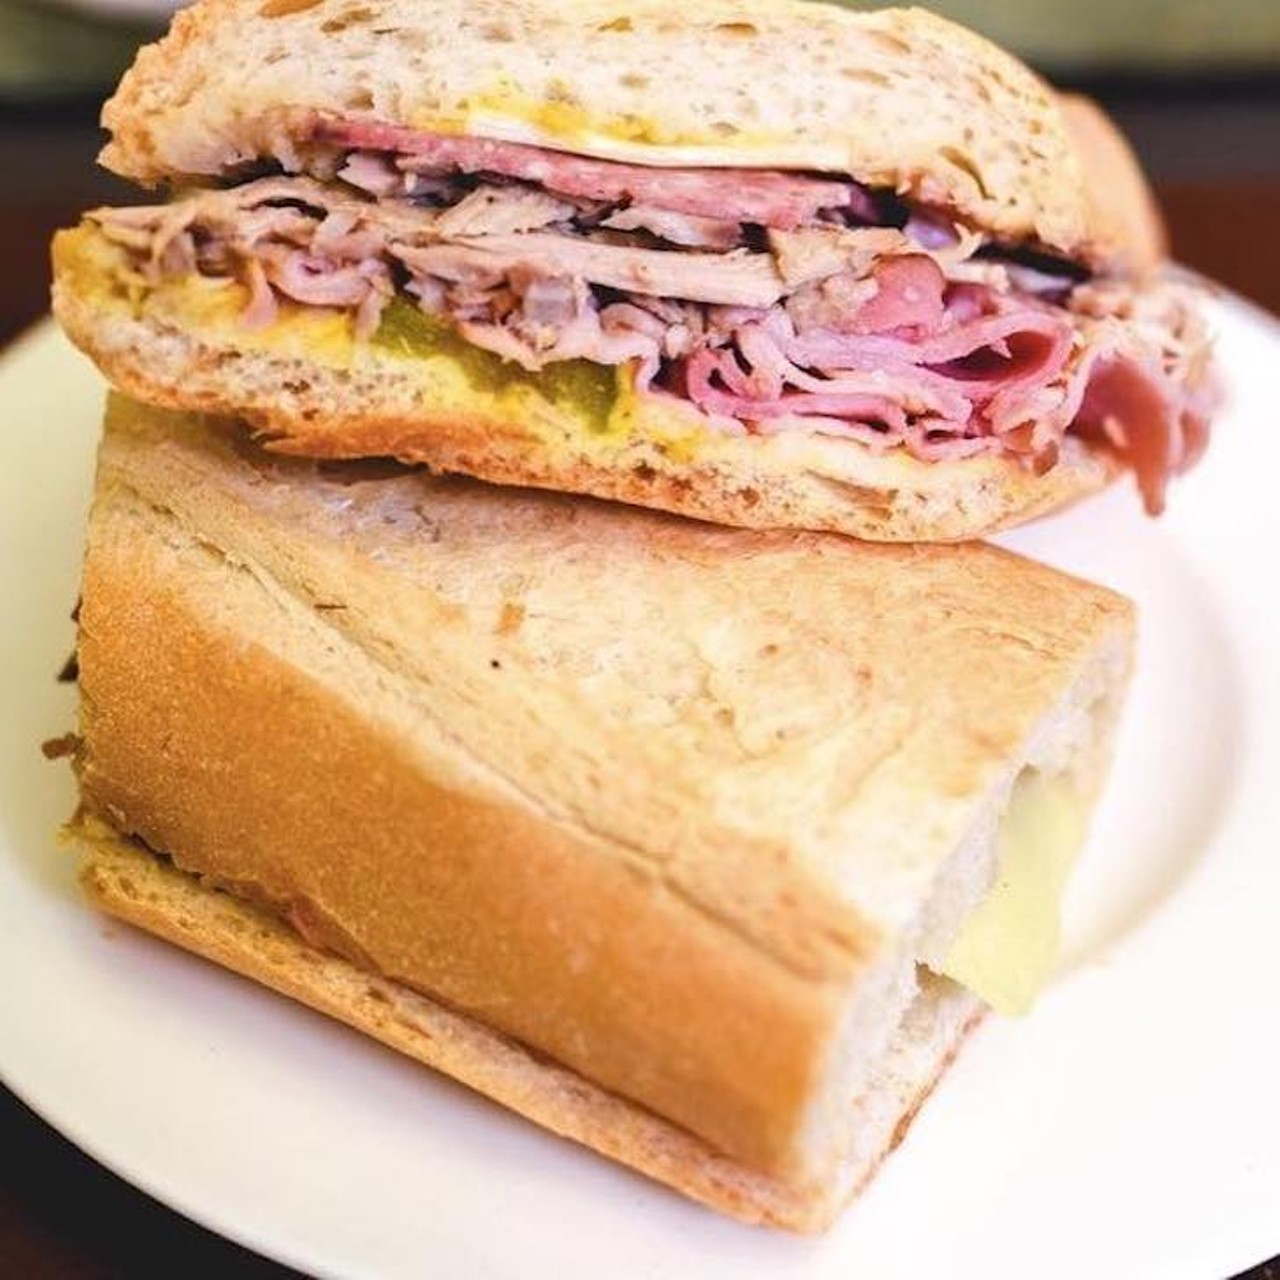 Cuban Sandwich at La Segunda  
2512 N 15th St, Ybor
Tampa has to represent when it comes to the Cuban sandwich, and La Segunda is one of the OGs in town who is keeping it traditional. Make sure to go to the Ybor location for your authentic Tampa Bay experience. Wouldn&#146;t hurt to also grab a cafe con leche.
Photo via La Segunda/ Facebook